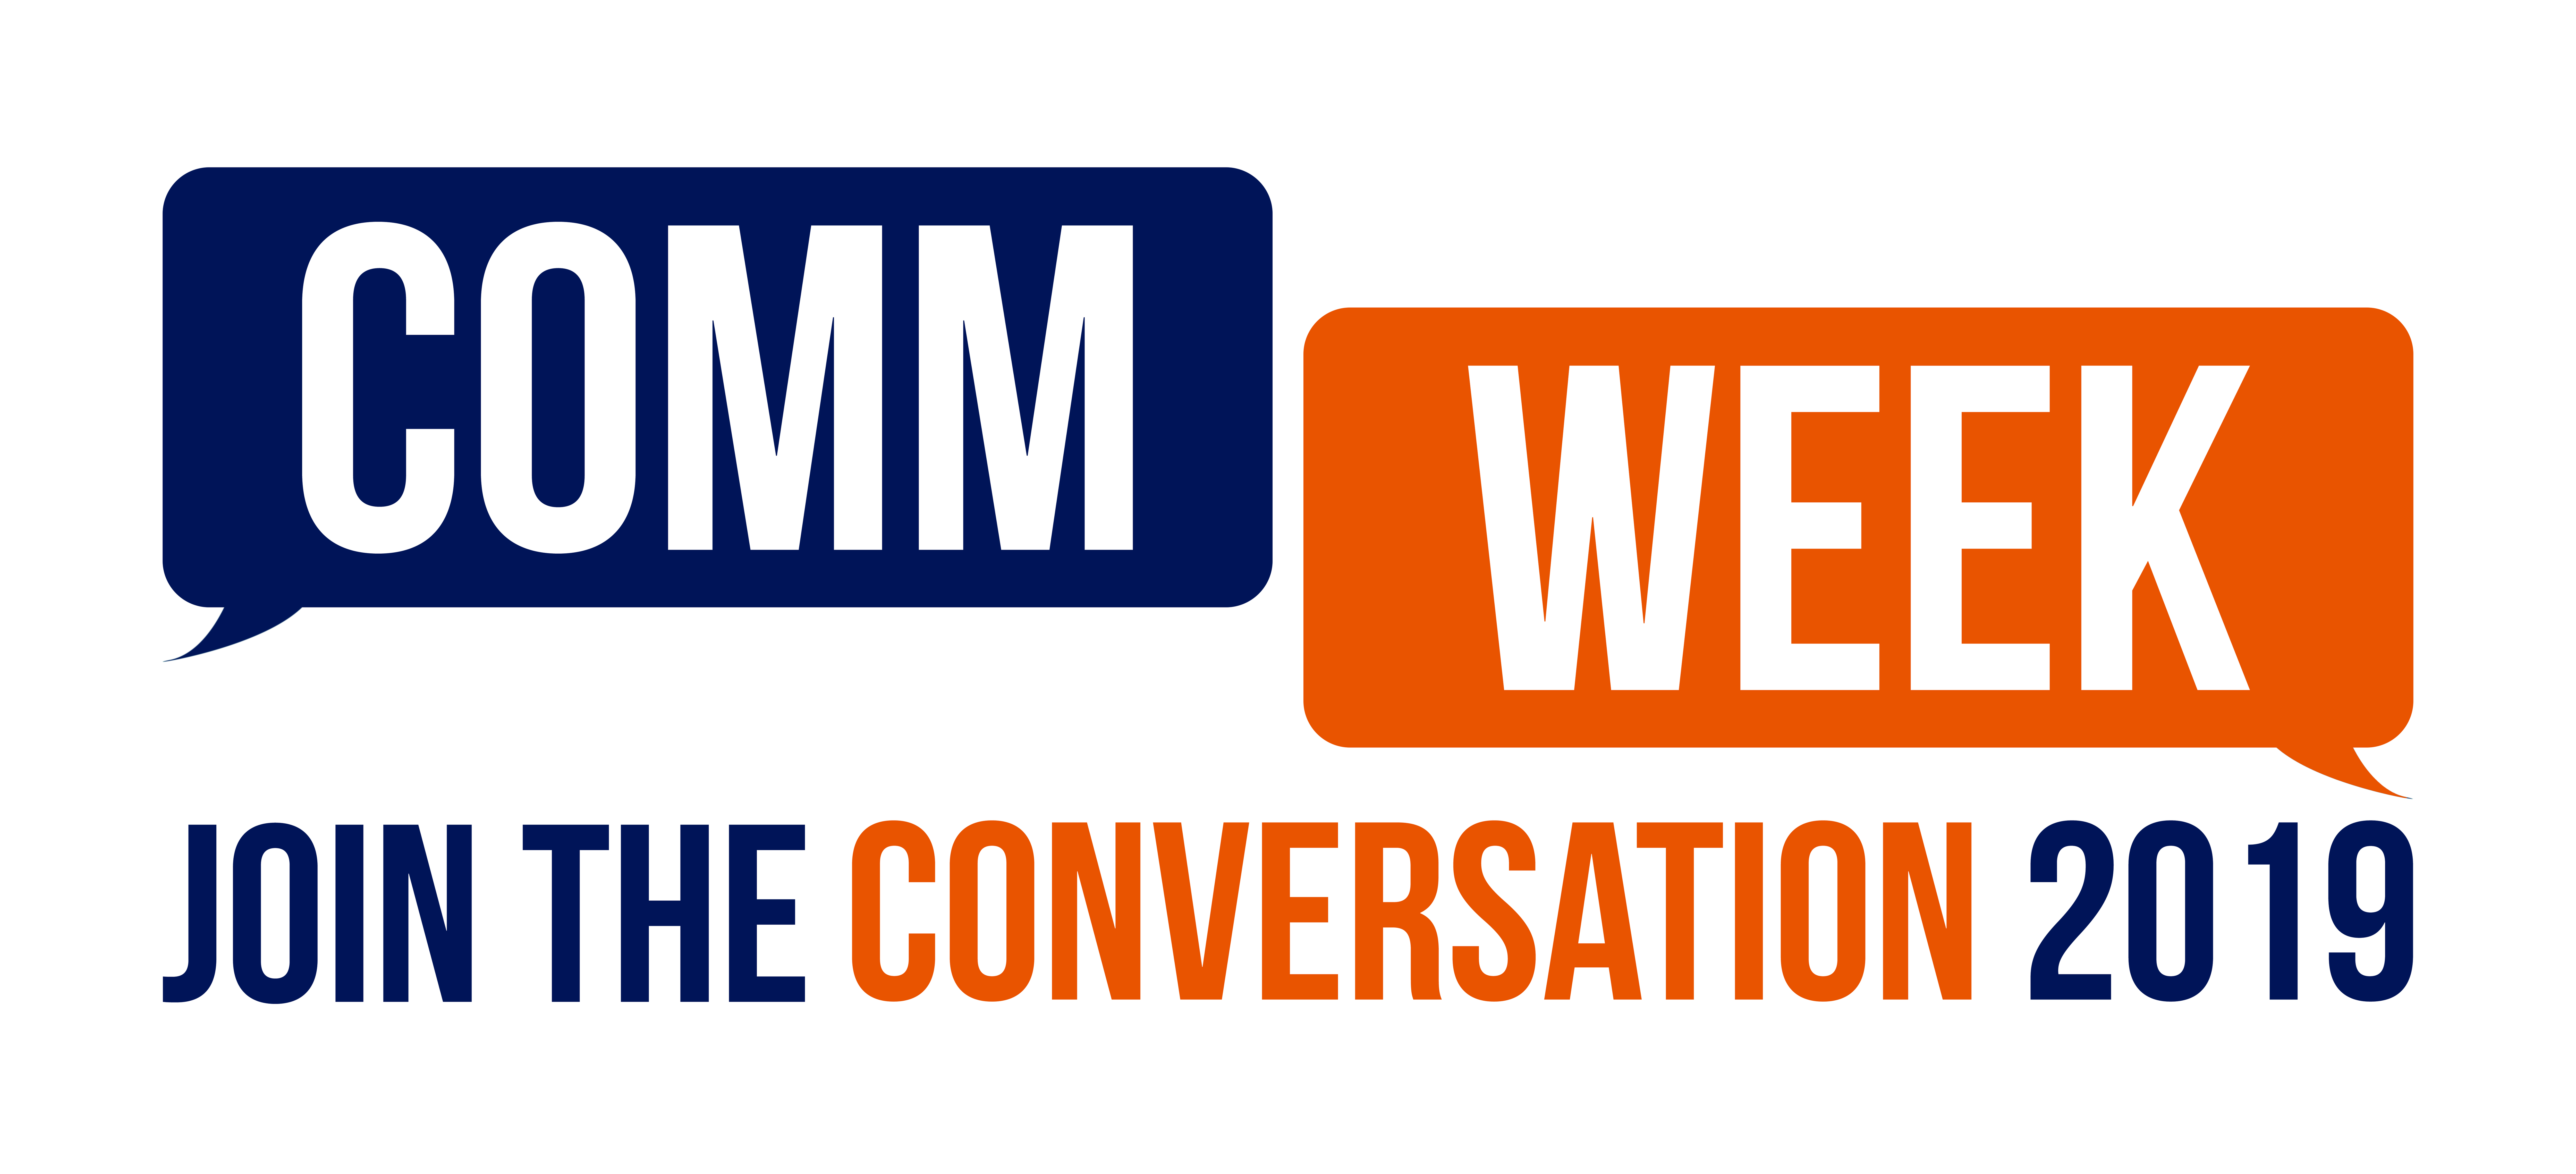 CommWeek - Join the Conversation 2019